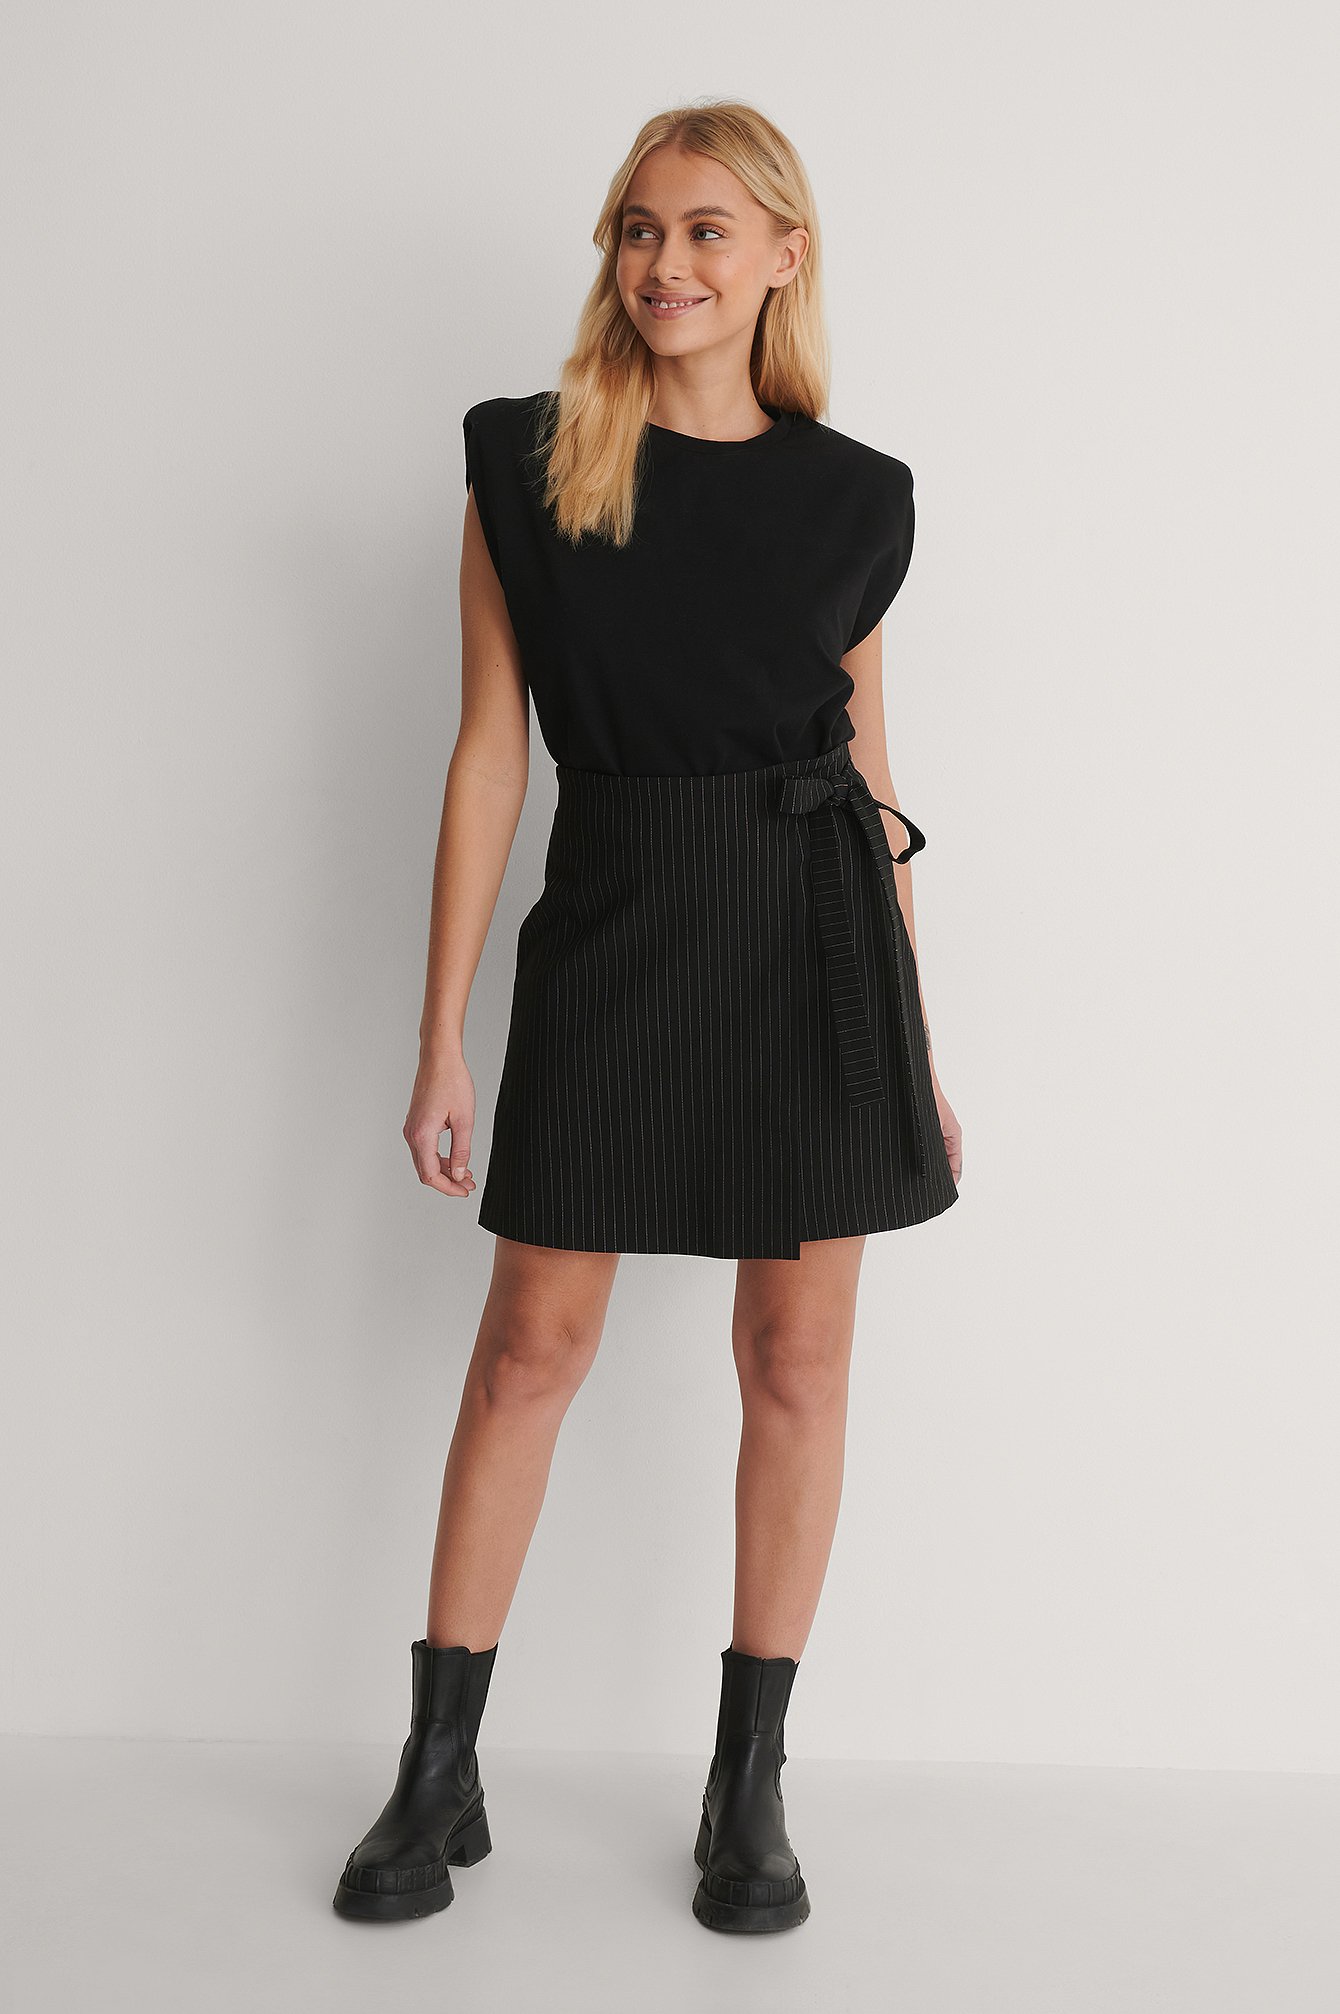 Tie Side Pinstripe Skirt Outfit.